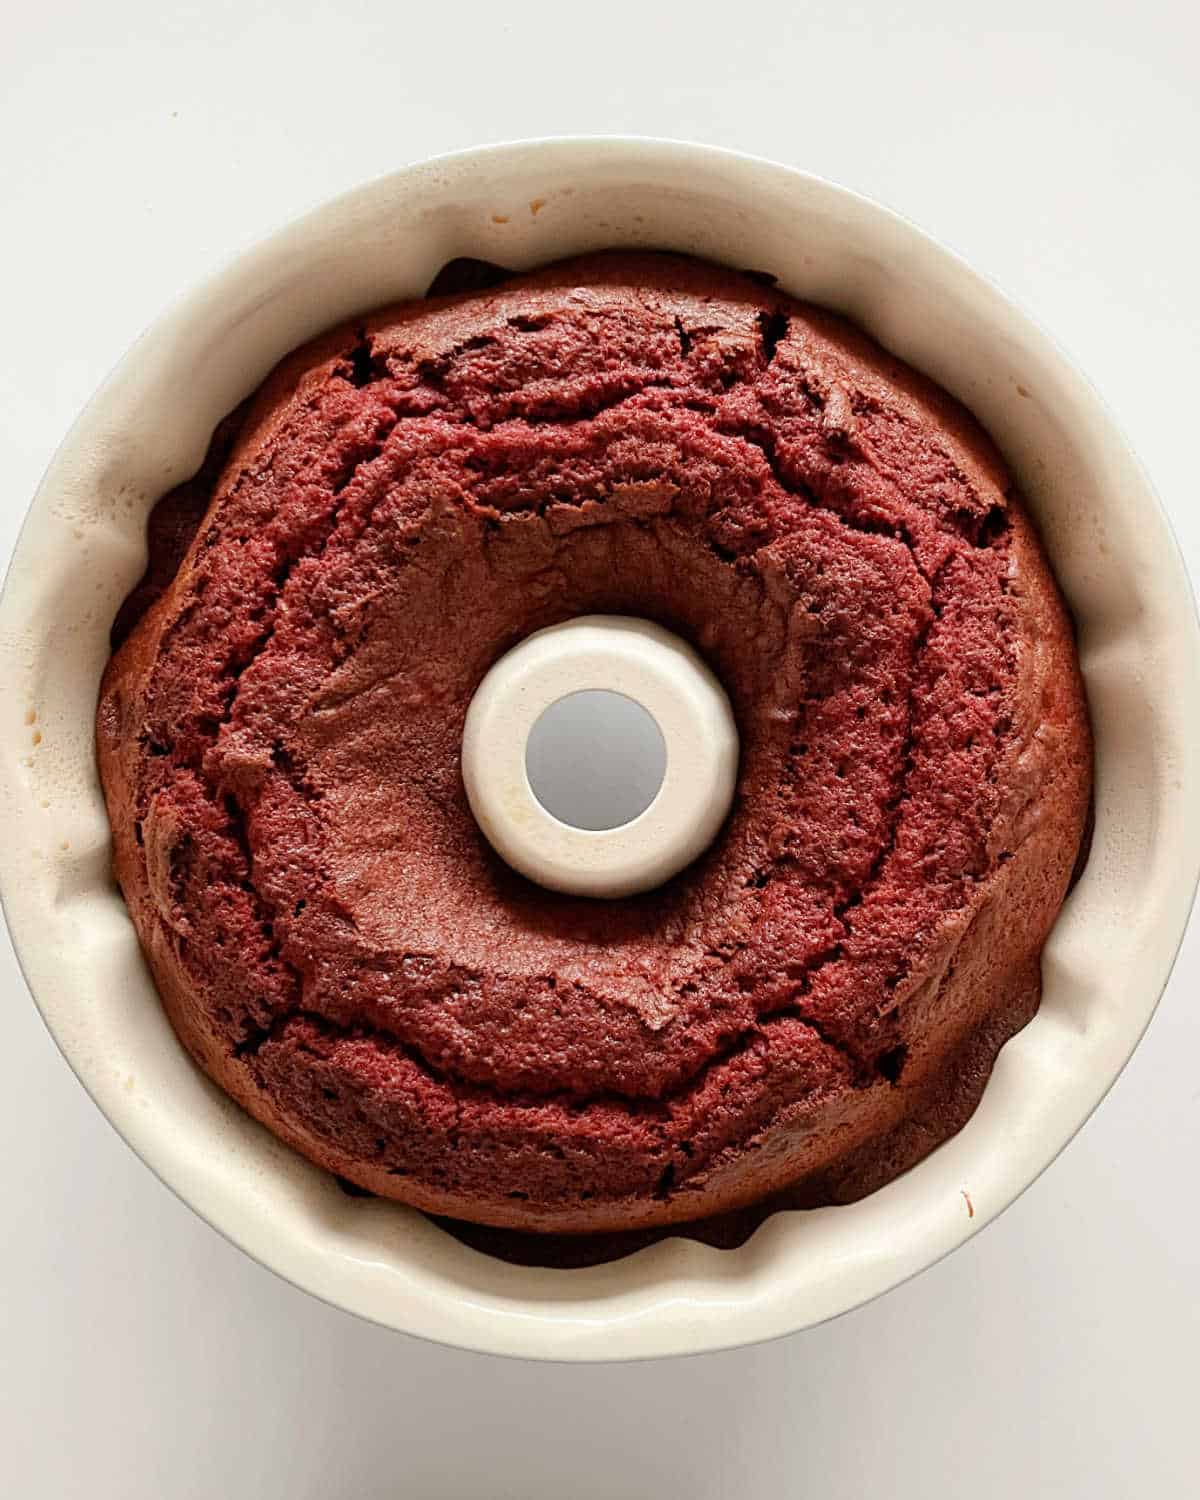 Top view of baked red velvet bundt cake in white pan on a white surface.